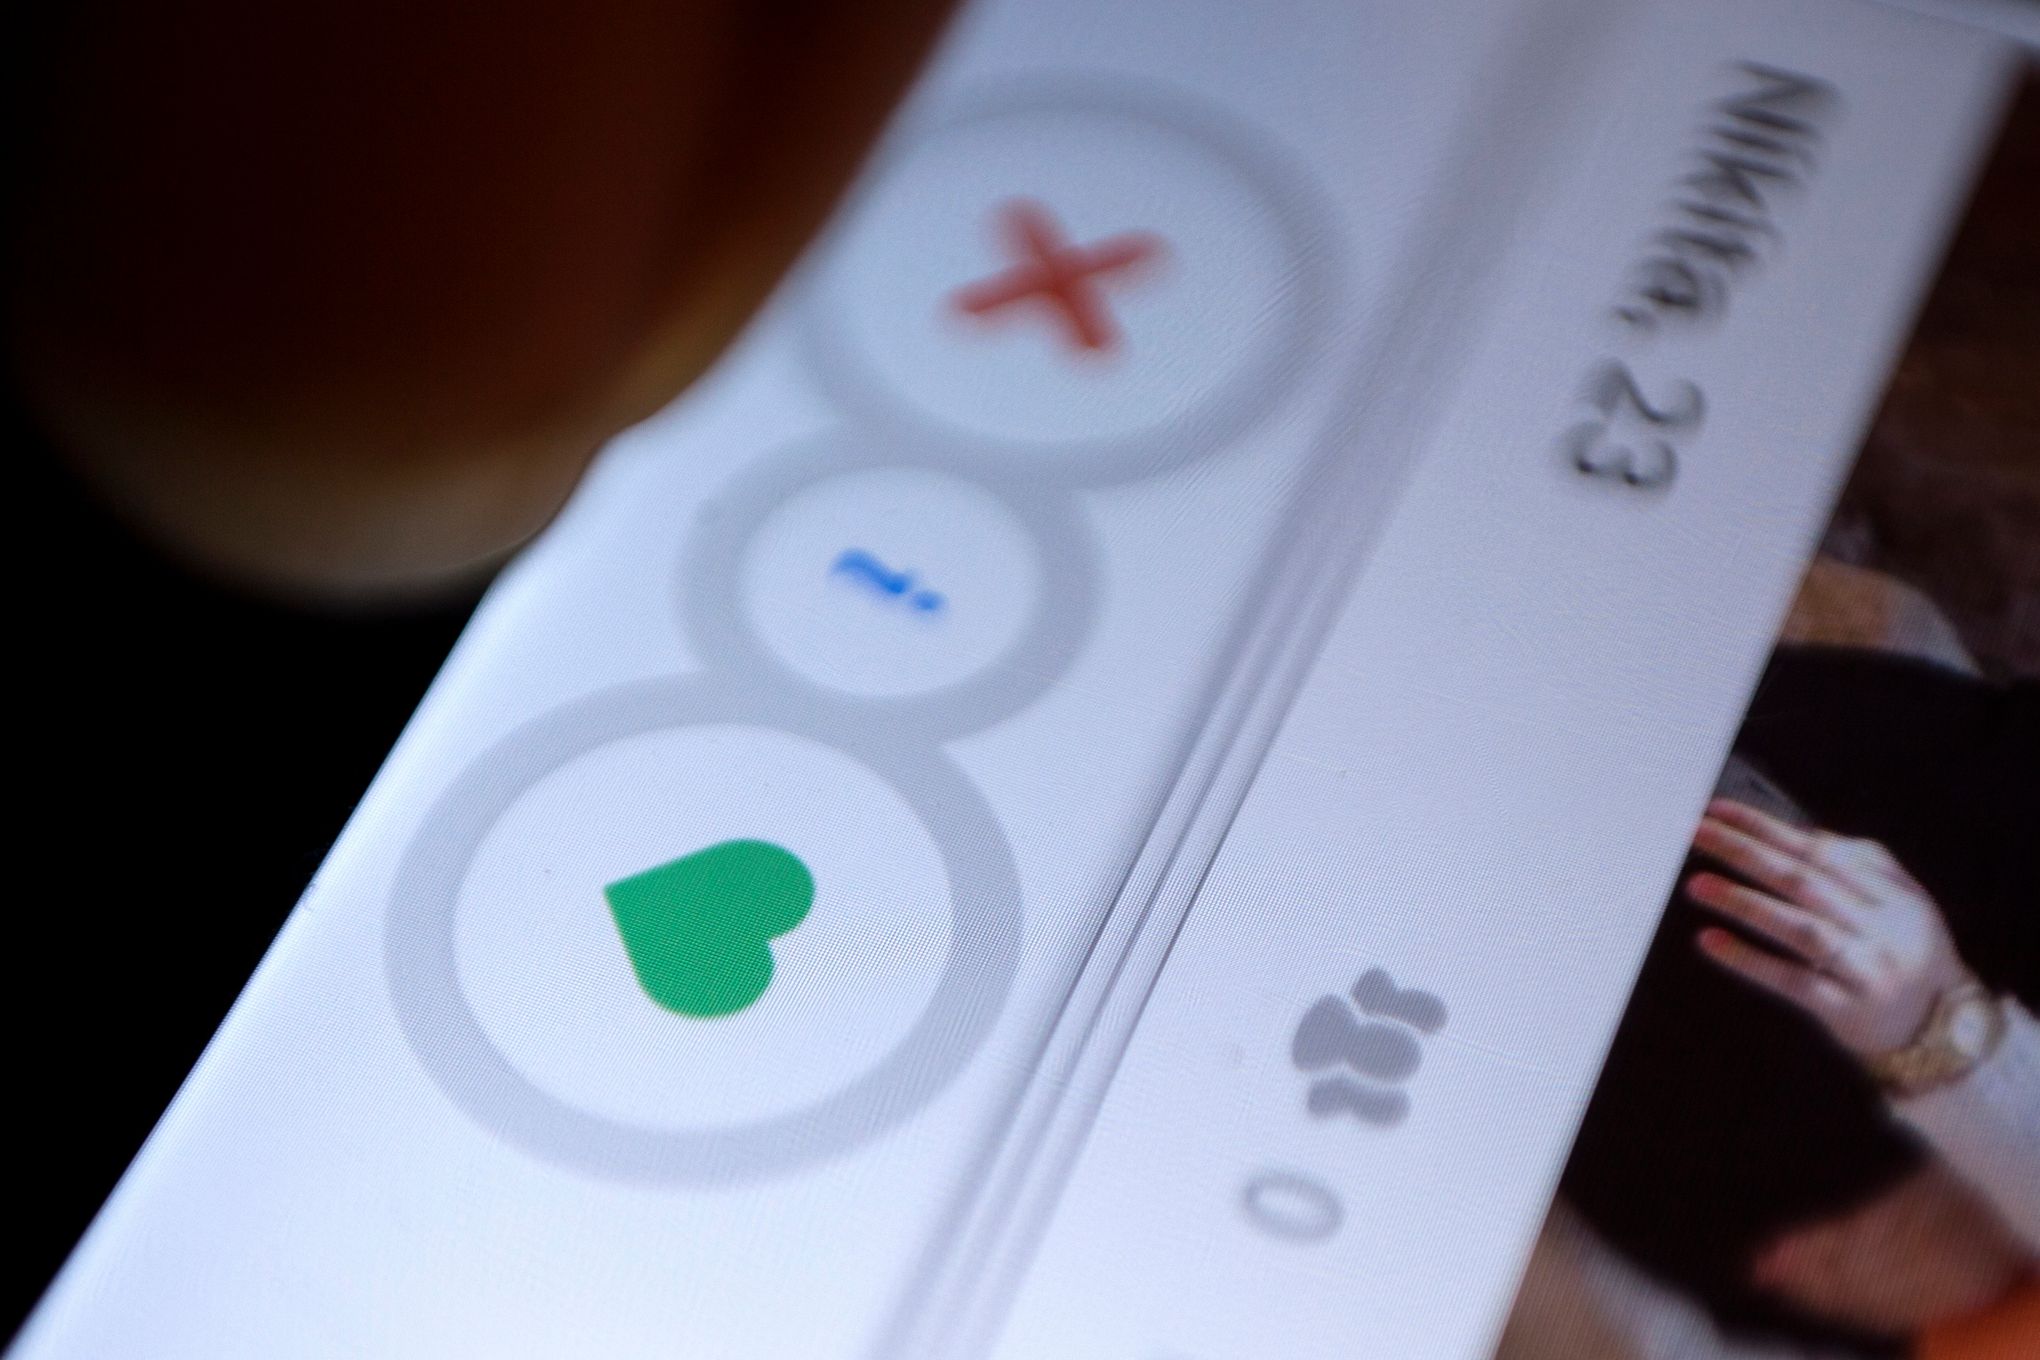 Young adults swipe right on Tinder, but is it just a game?